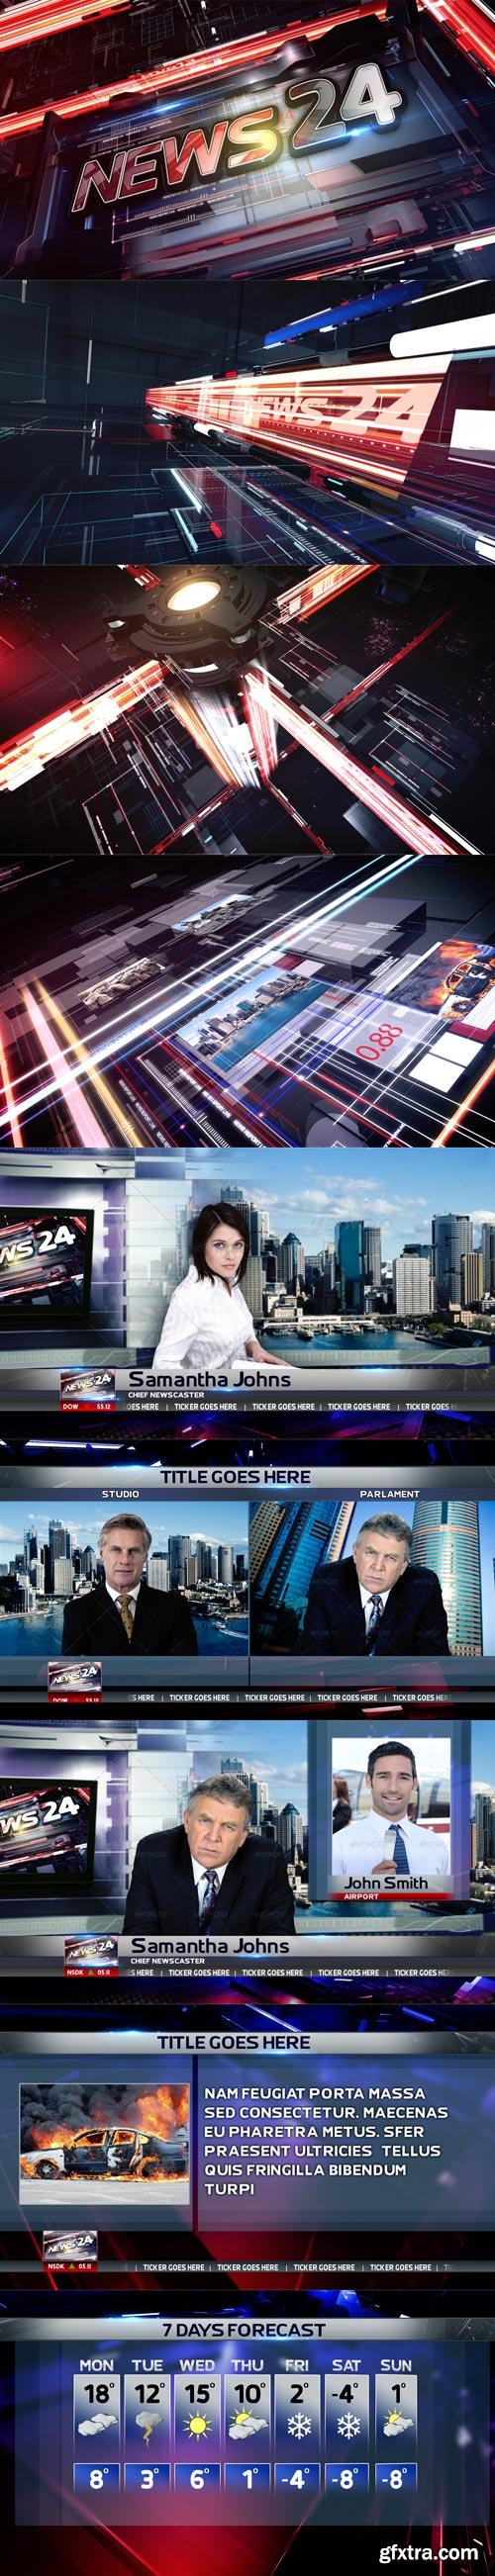 Videohive - News 24 Broadcast Pack - 9943953